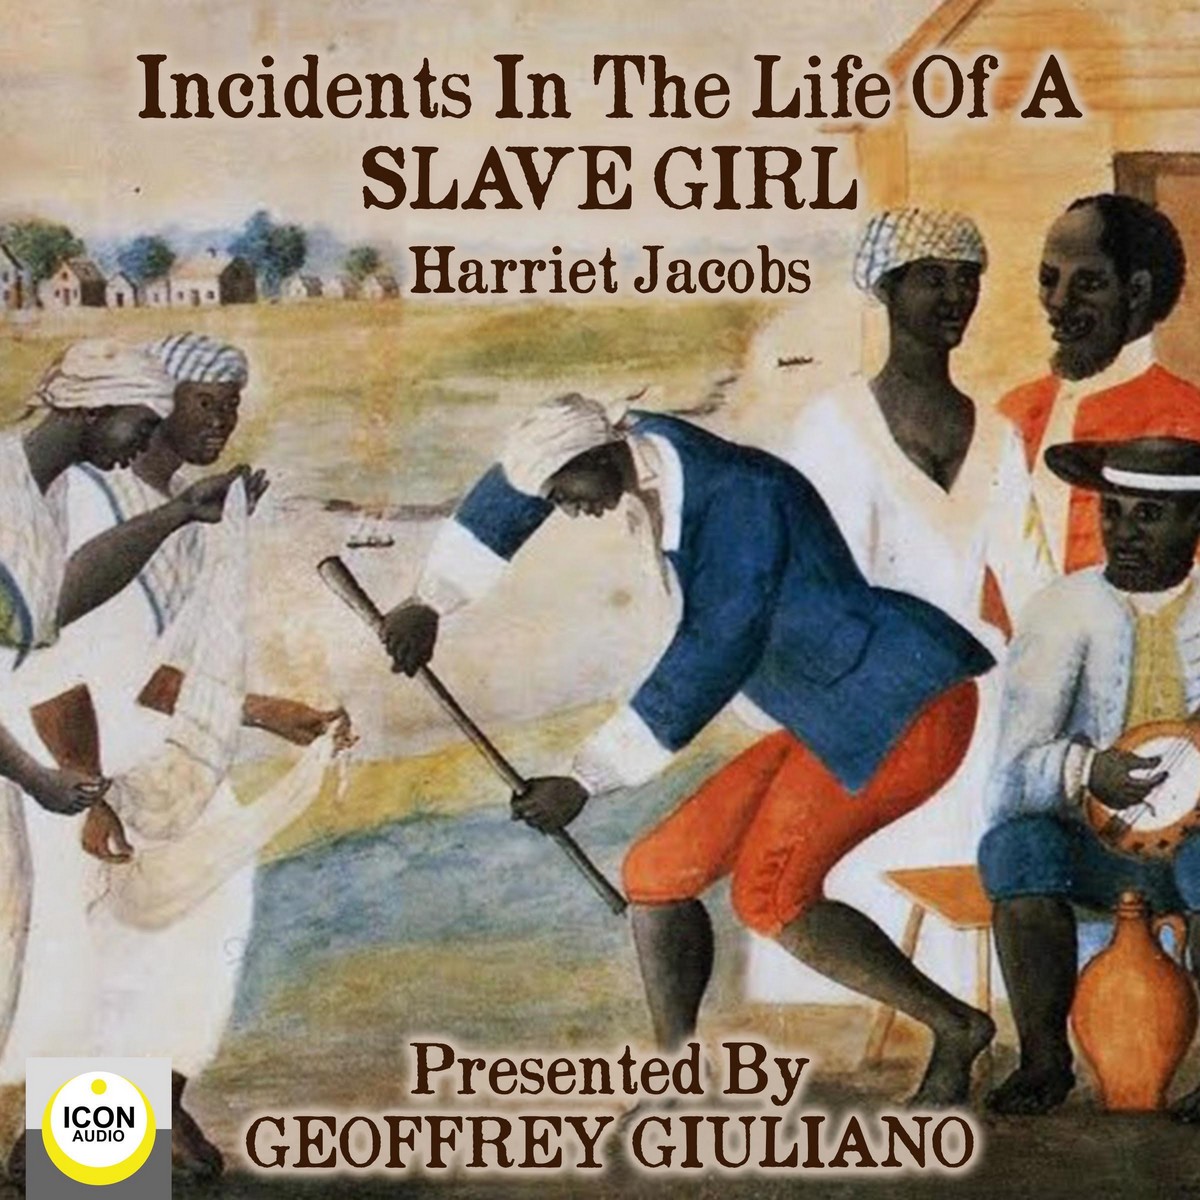 Incidents in The Life of a Slave Girl